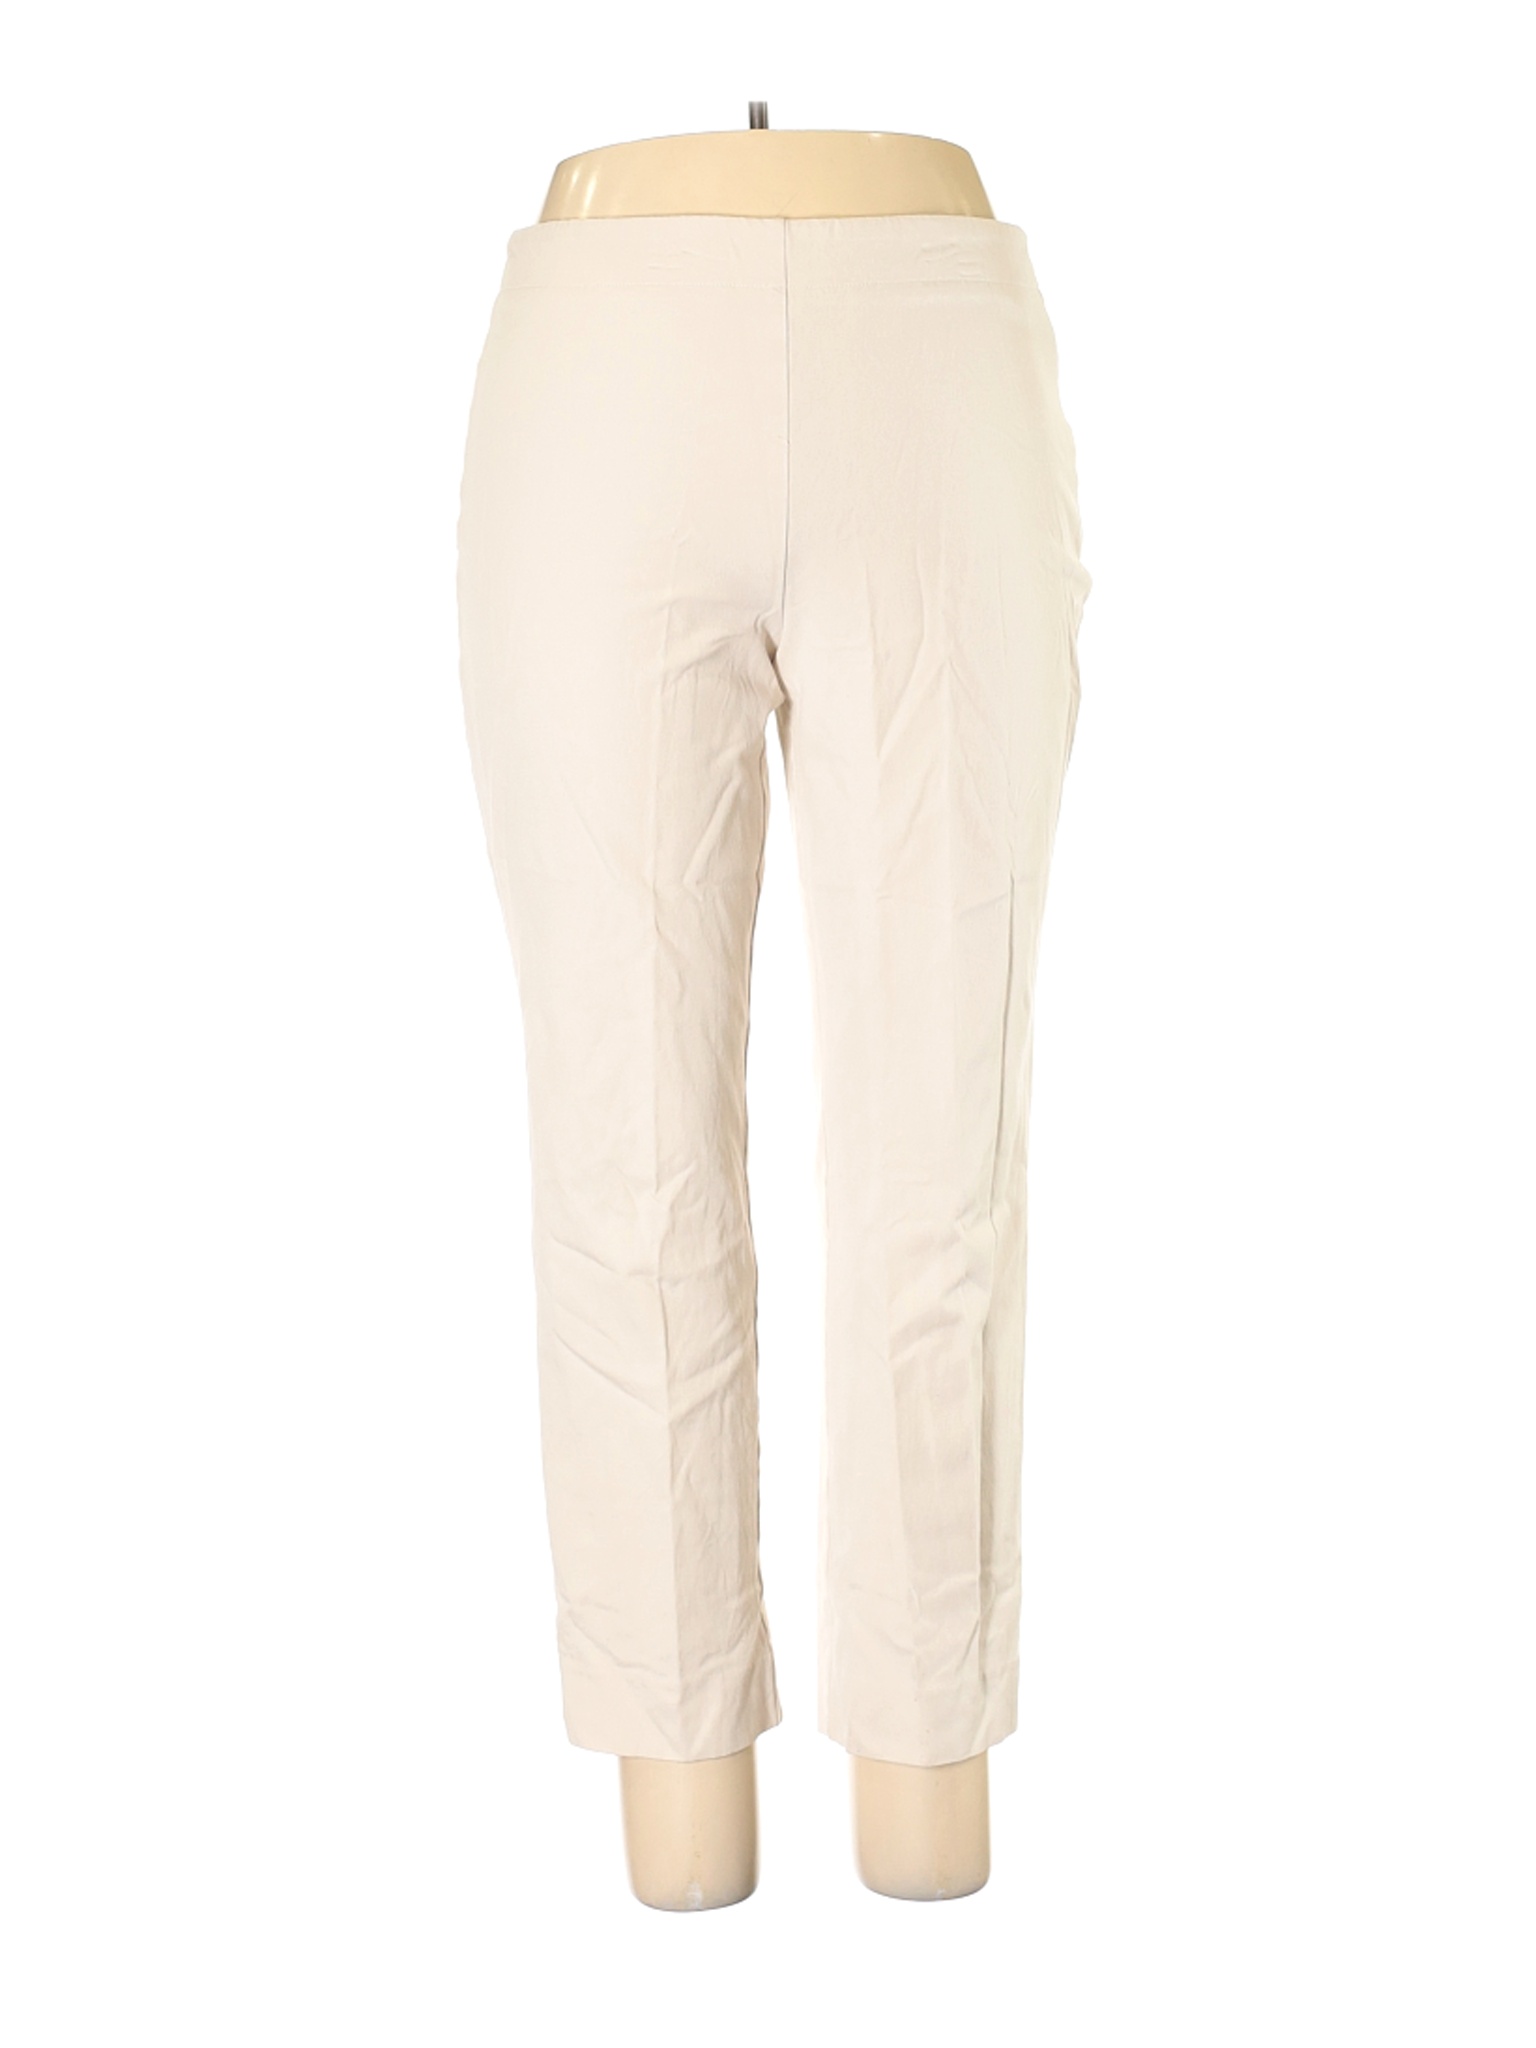 Talbots Outlet Women Ivory Casual Pants 14 | eBay